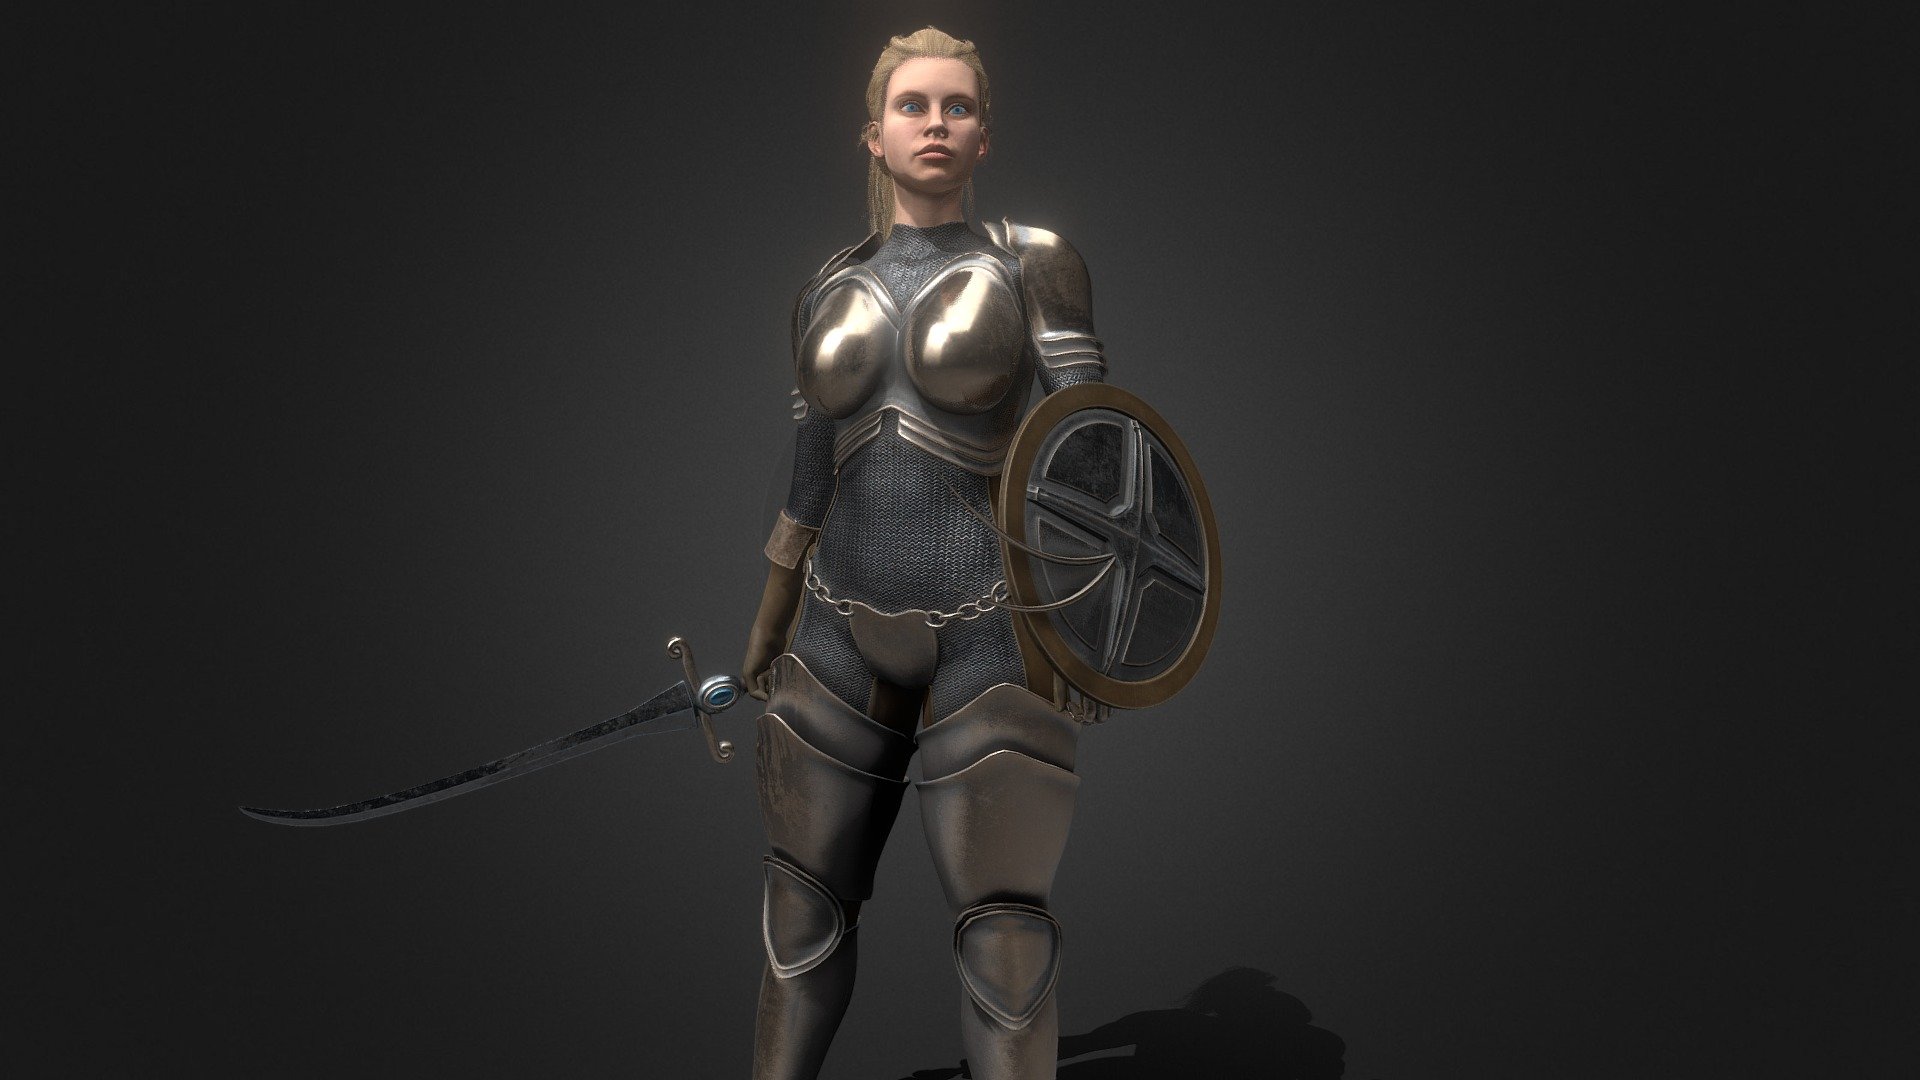 A fantasy inspired female Hero!

Designed in Med-Poly PBR including Albedo, Normal, Metallic, AO, and Roughness 2K textures.

This model is fully rigged as a humanoid and ready to animate in your 3D software or Game Engine!

154,490 Triangles 3d model